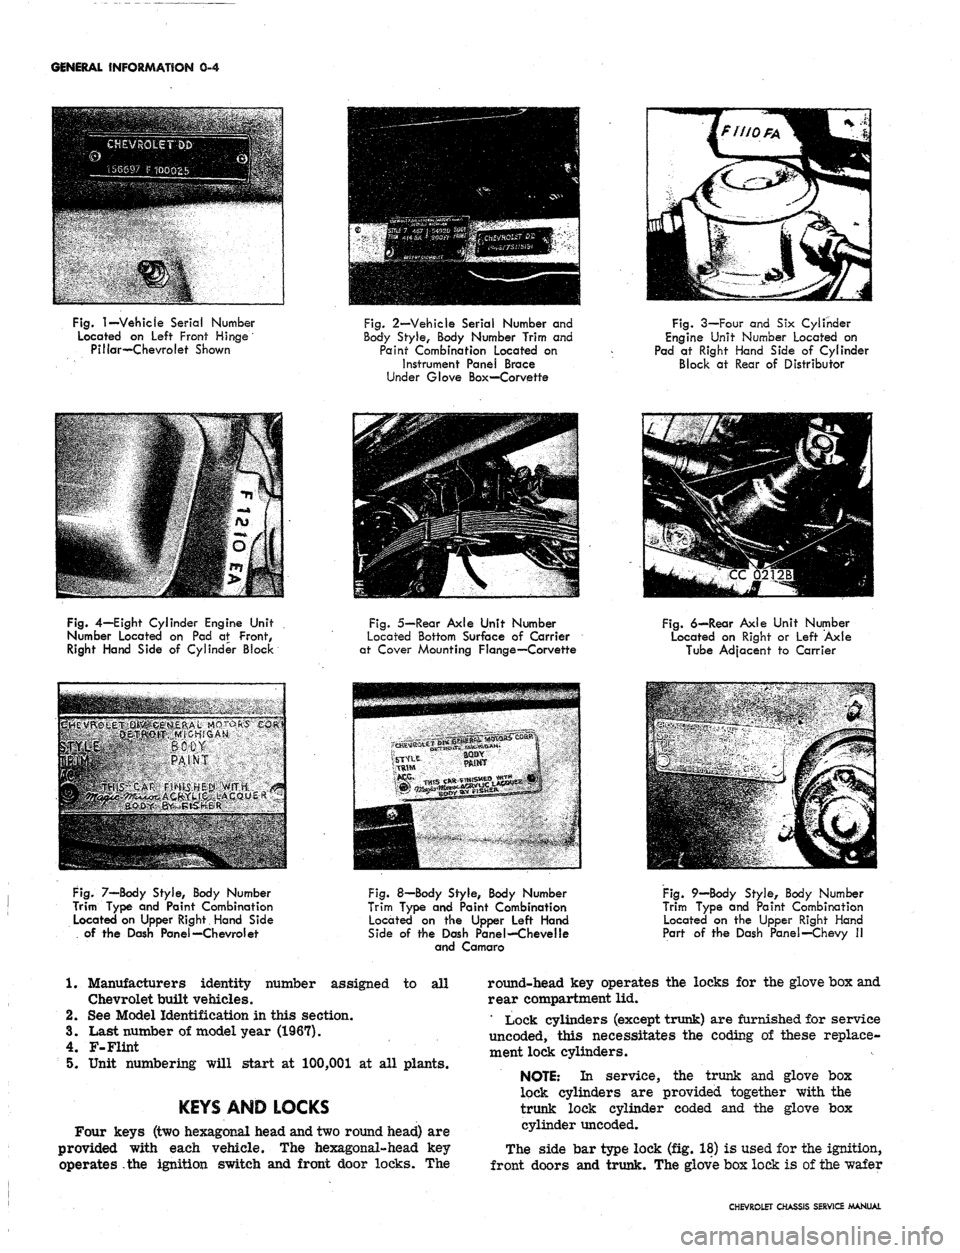 CHEVROLET CAMARO 1967 1.G Chassis Workshop Manual 
GENERAL INFORMATION 0-4

Fig.
 1—Vehicle
 Serial Number

Located on Left Front Hinge

Pillar—Chevrolet Shown 
Fig.
 2—Vehicle Serial Number and

Body Style, Body Number Trim and

Paint Combinat